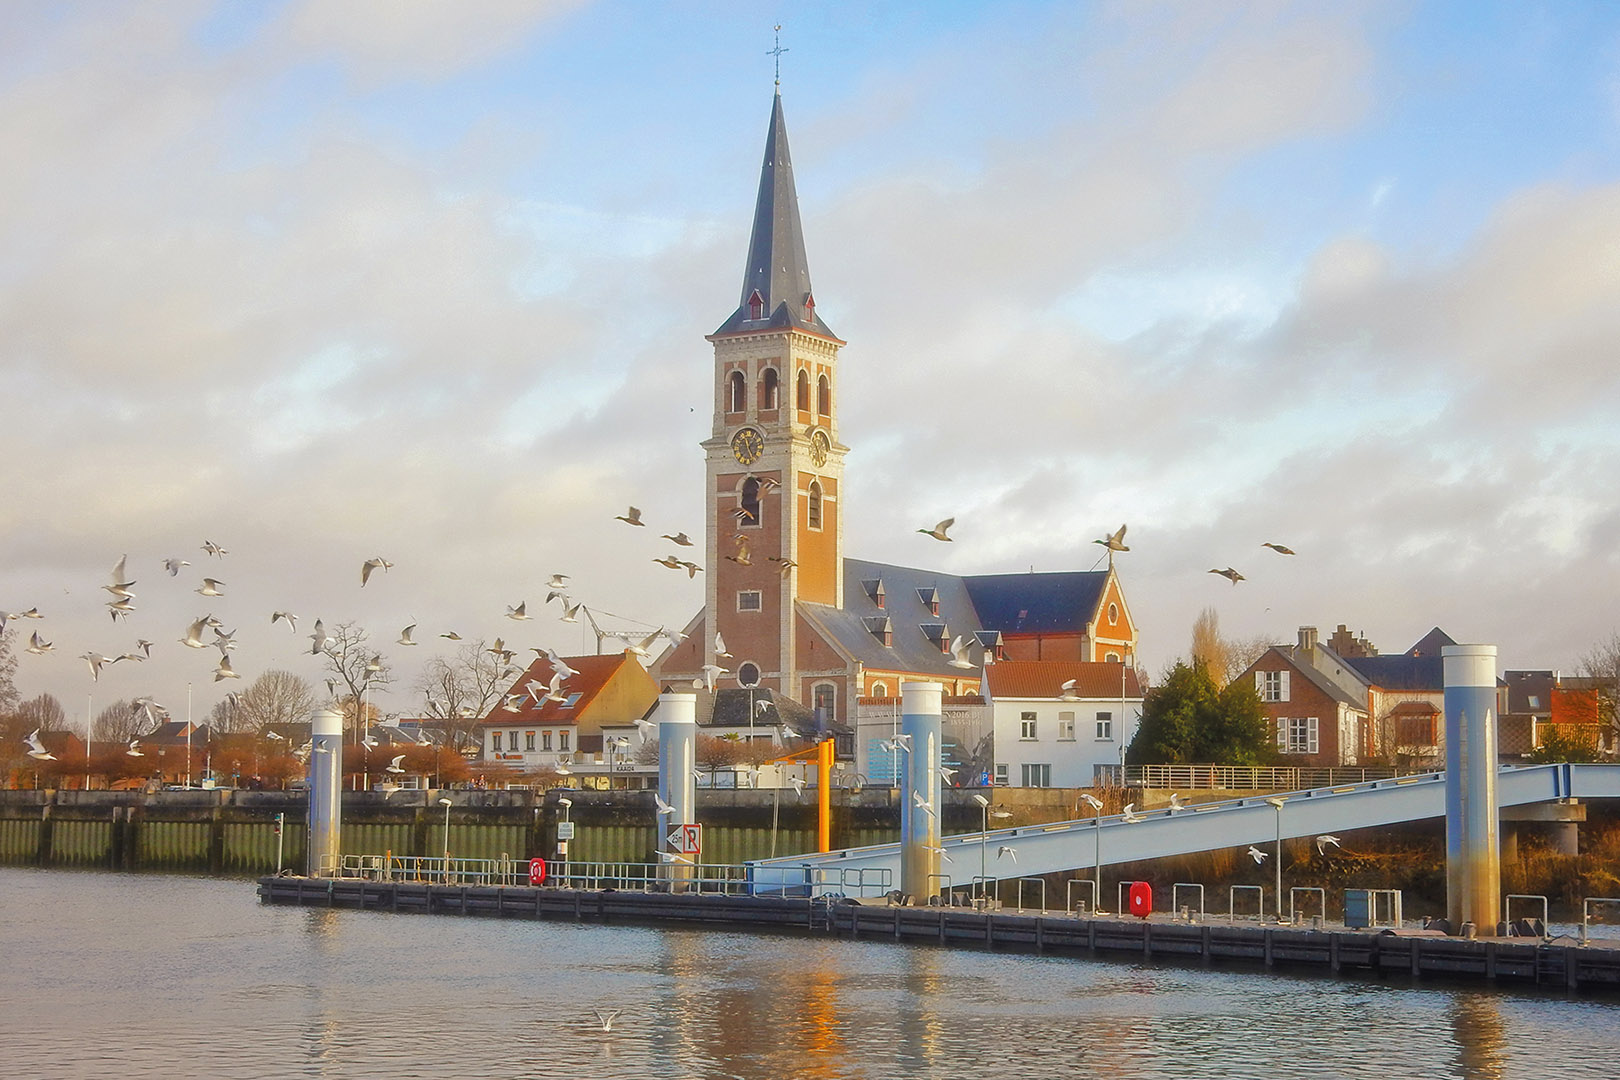 fotoreeks Discover the Scheldeland by boat with visits to Rupelmonde and Sint-Amands, departing from Schellebelle or Dendermonde